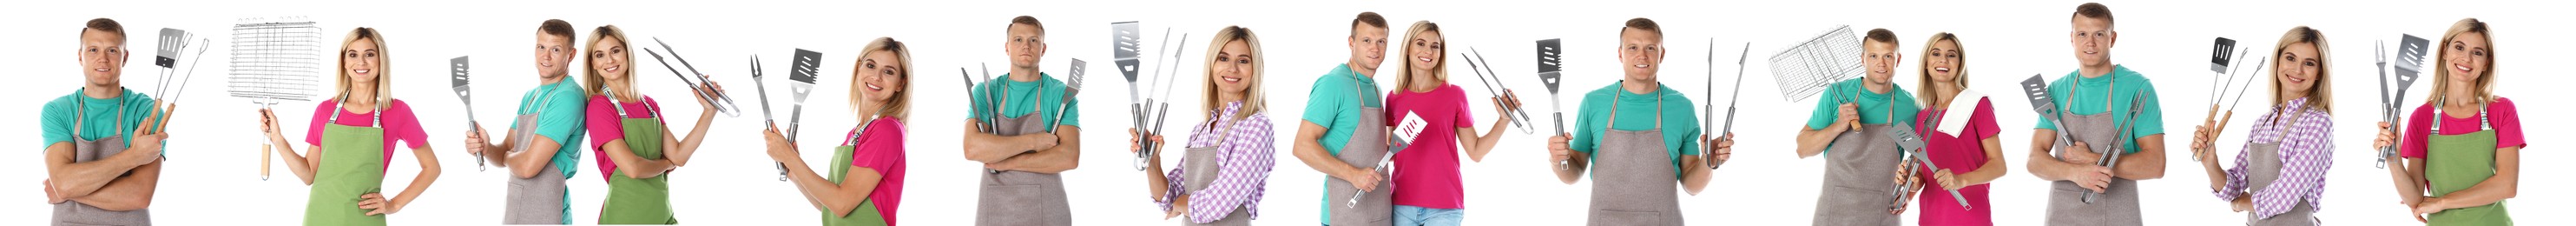 Collage with photos of man and woman holding barbecue utensils on white background. Banner design